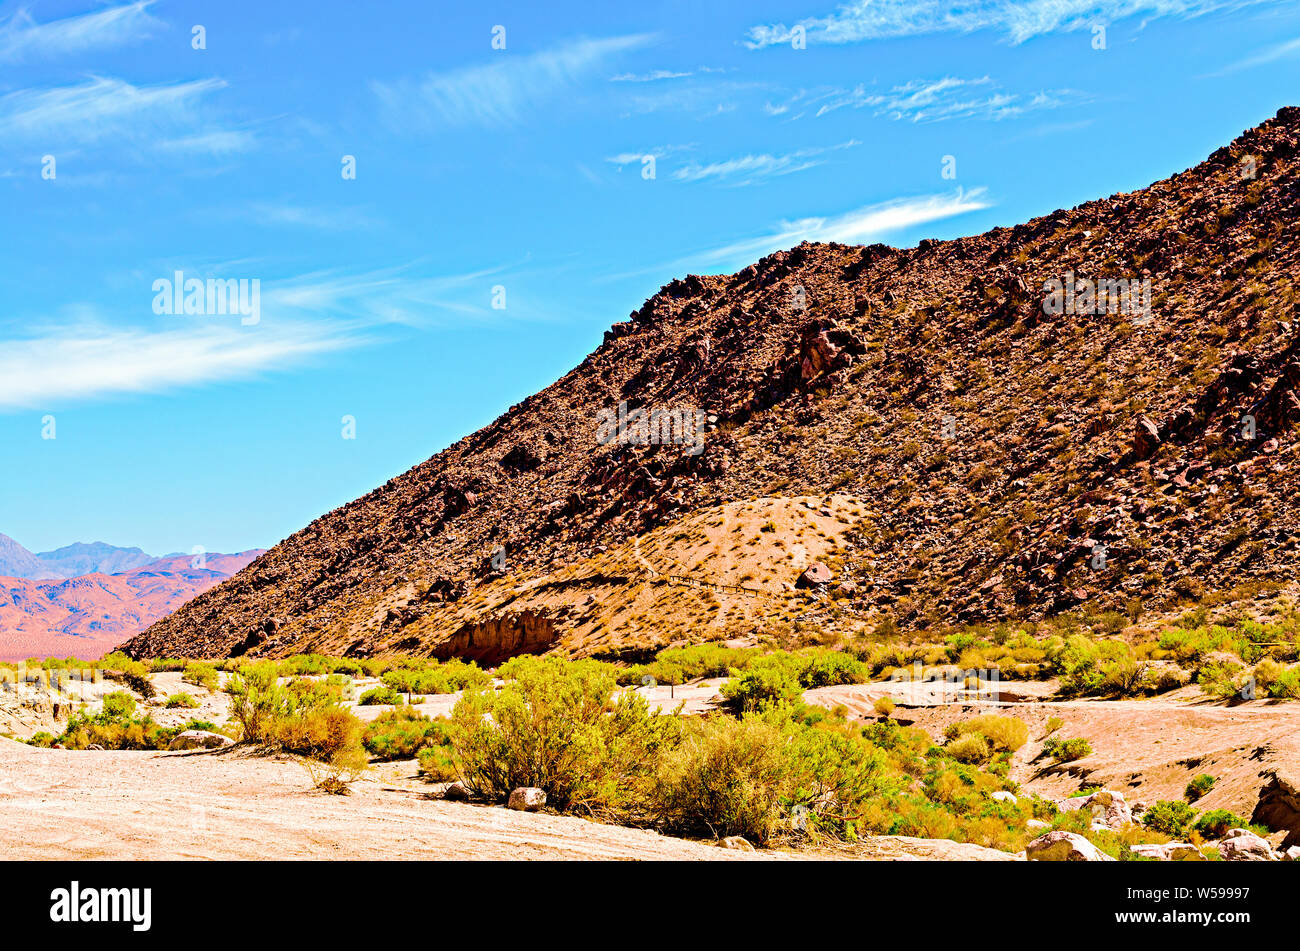 Desert valley with great bushes and brown barren hillside under blue skies with white clouds. Stock Photo